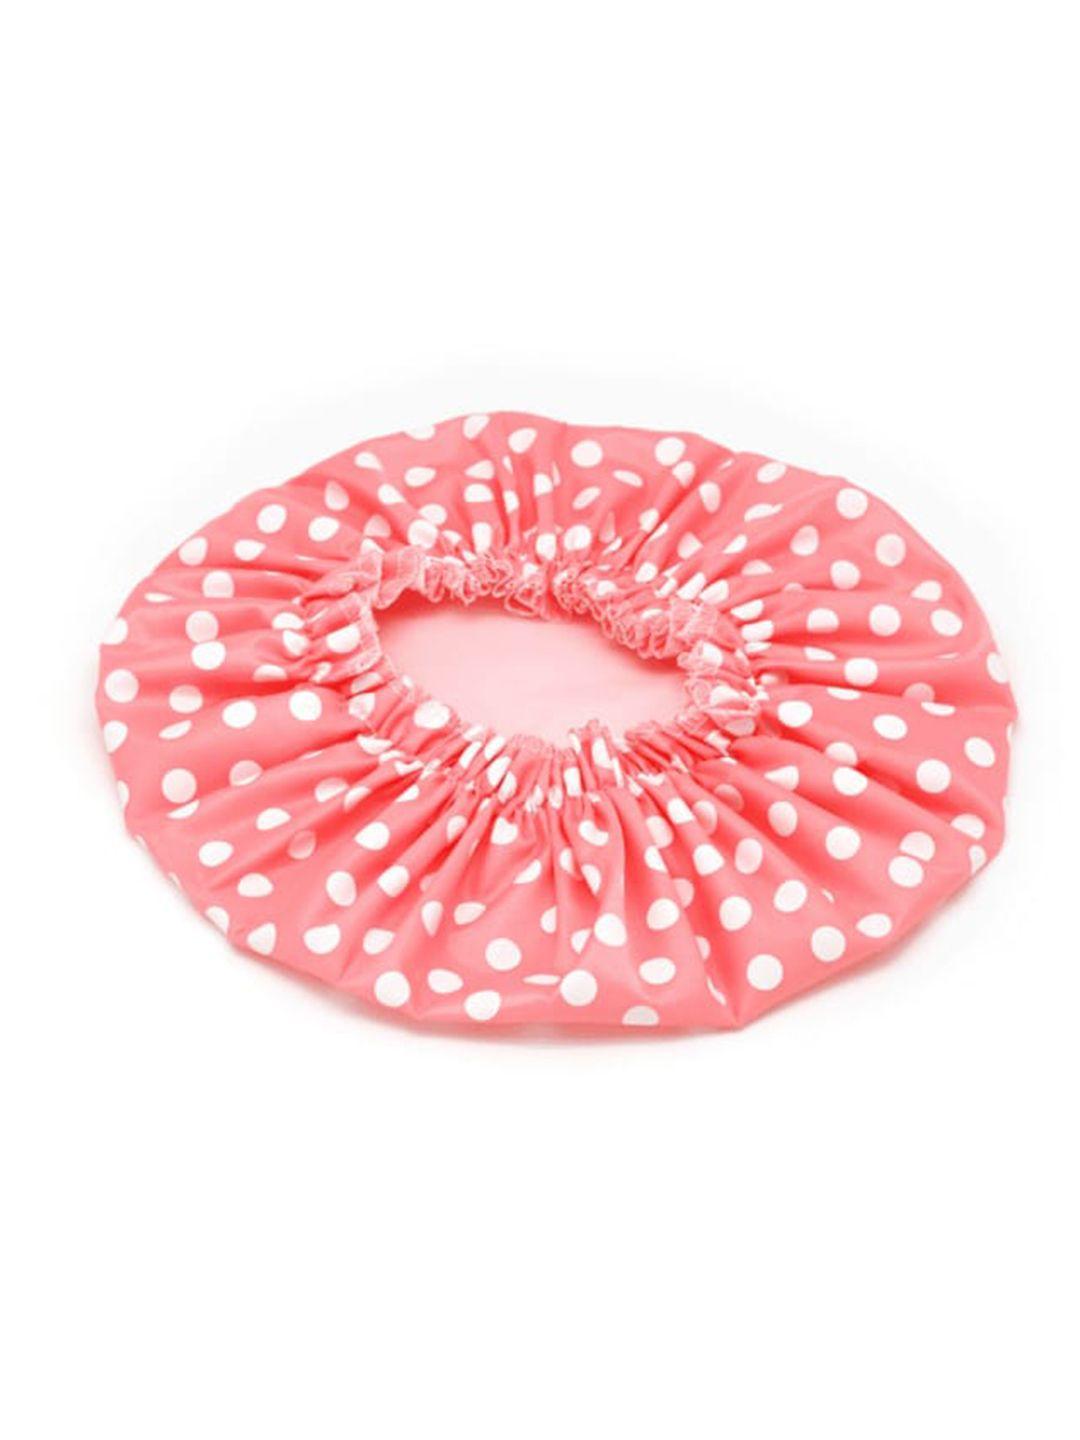 basicare pink & white doted shower cap